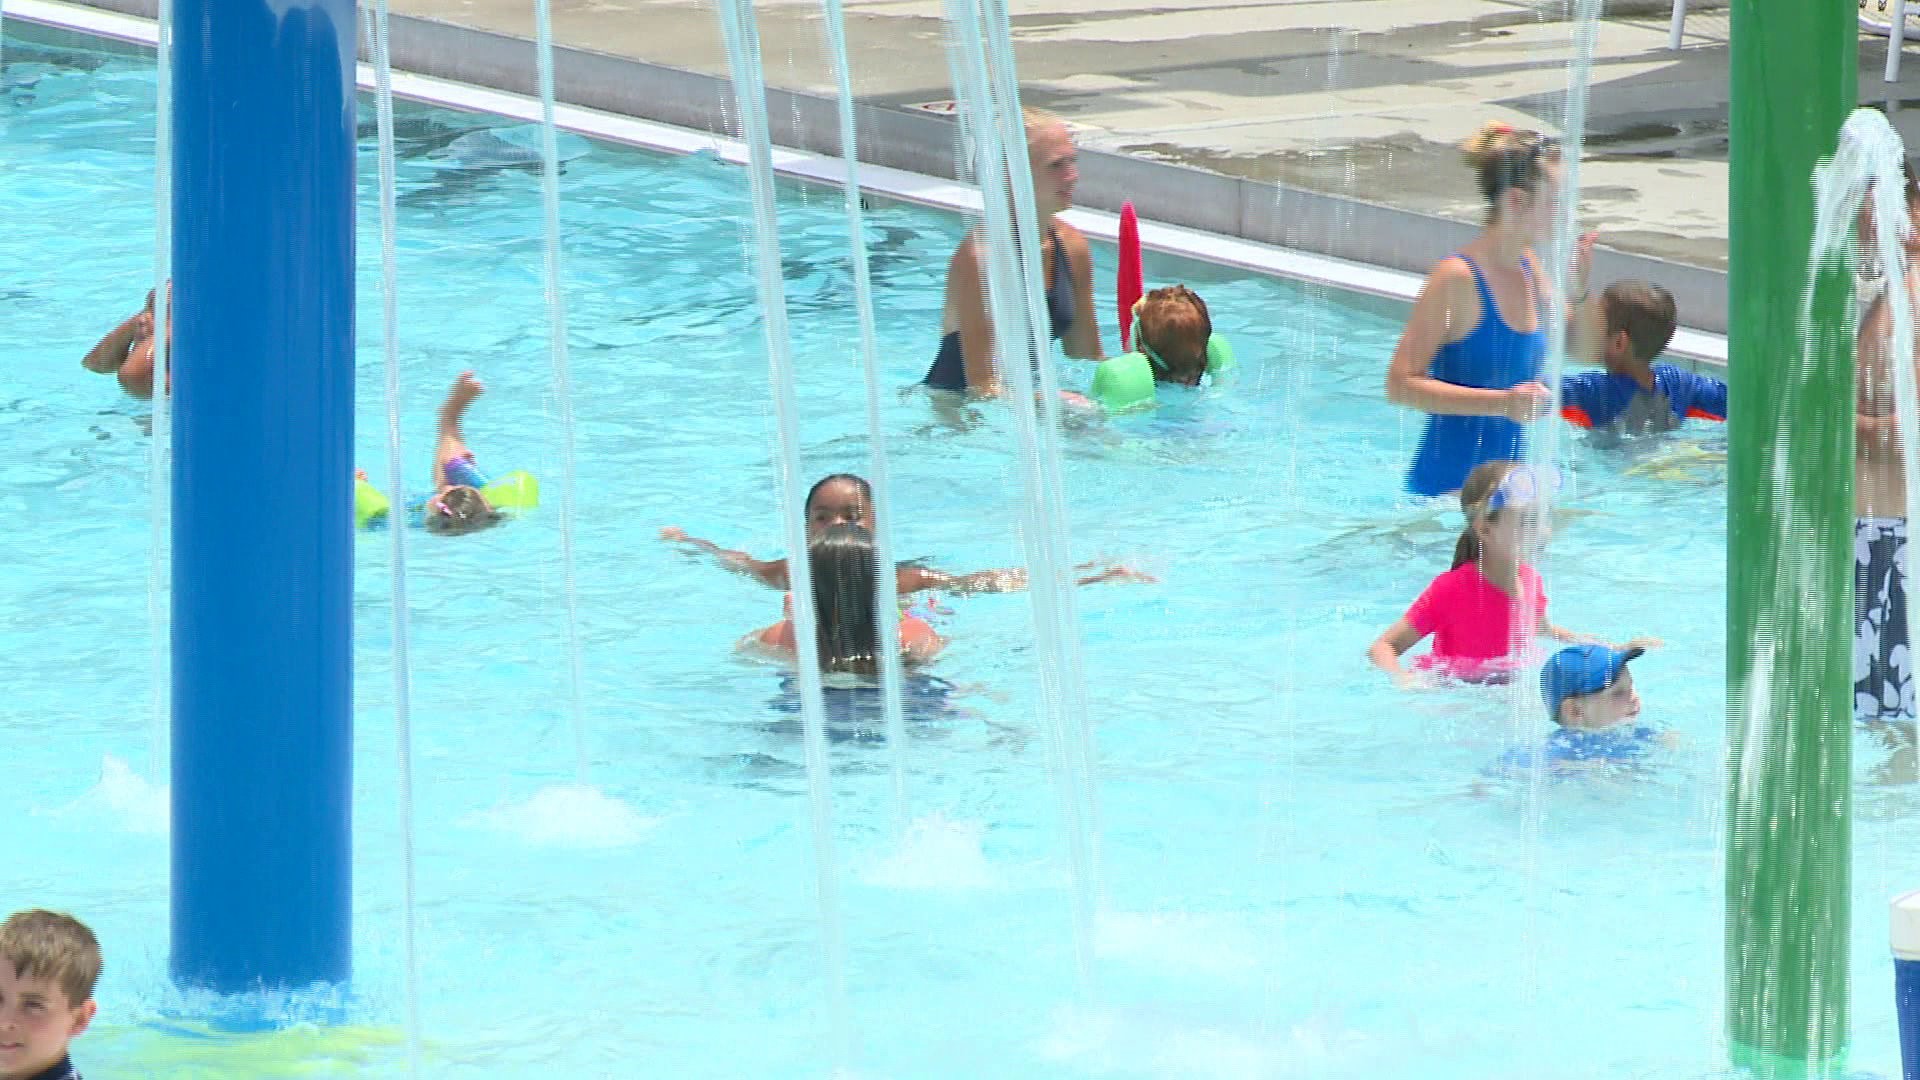 Middlebury pool-goers try to beat the heat